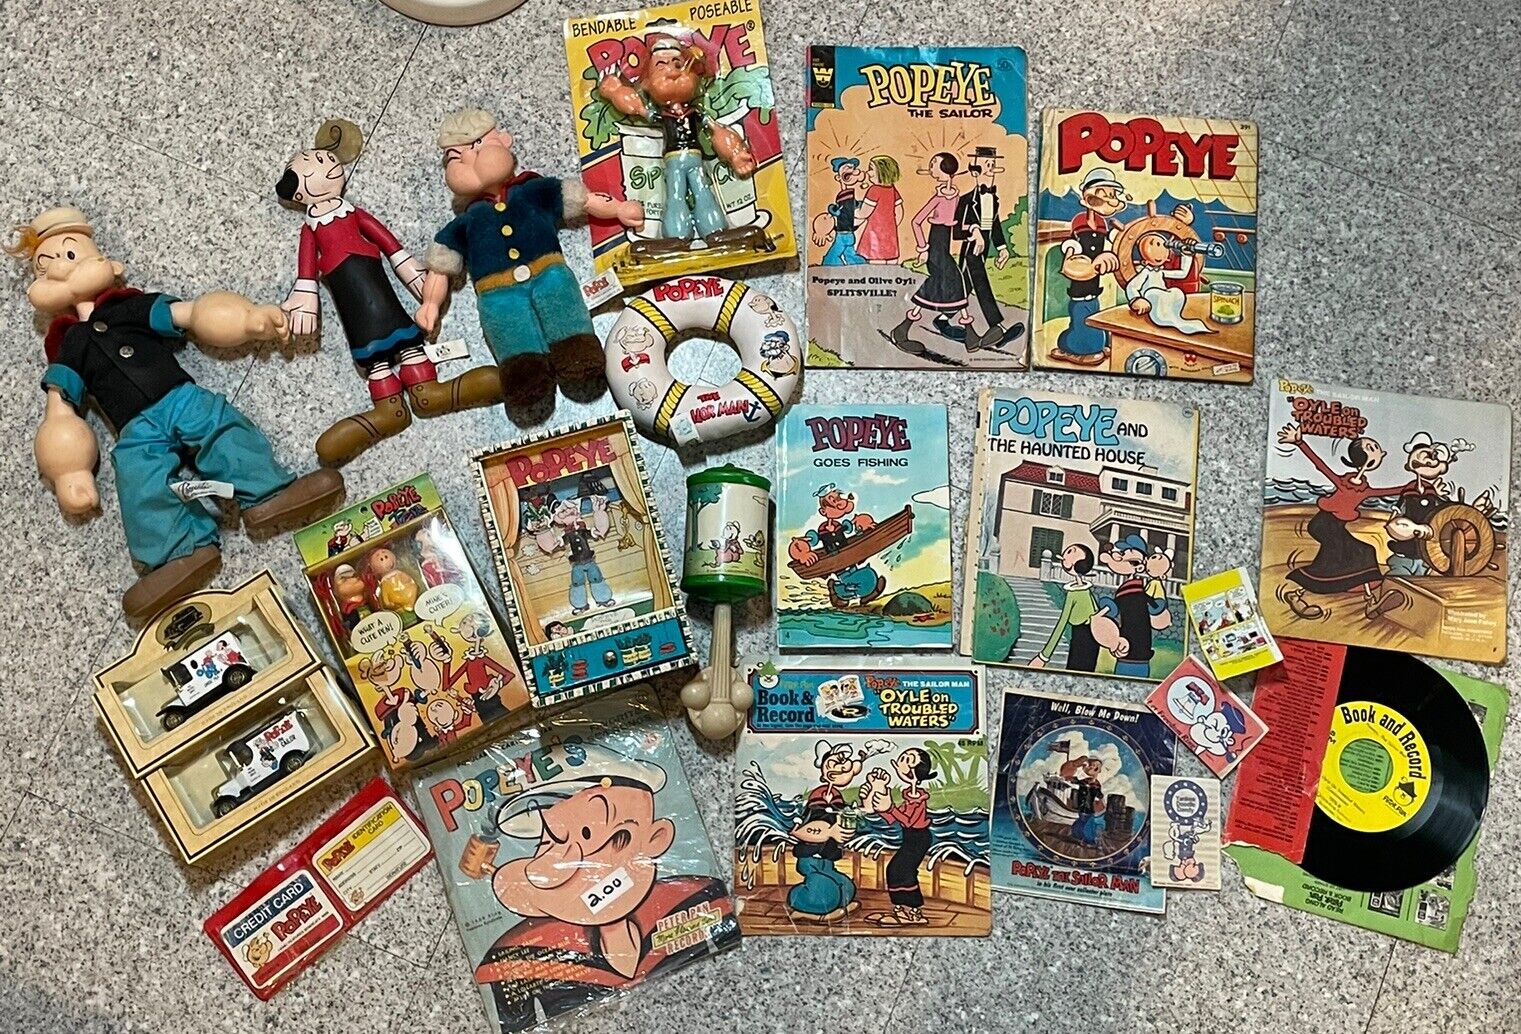 RARE VTG Popeye The Sailer Man Toys, Items & Books (New & Used) Lot Of 22 Items